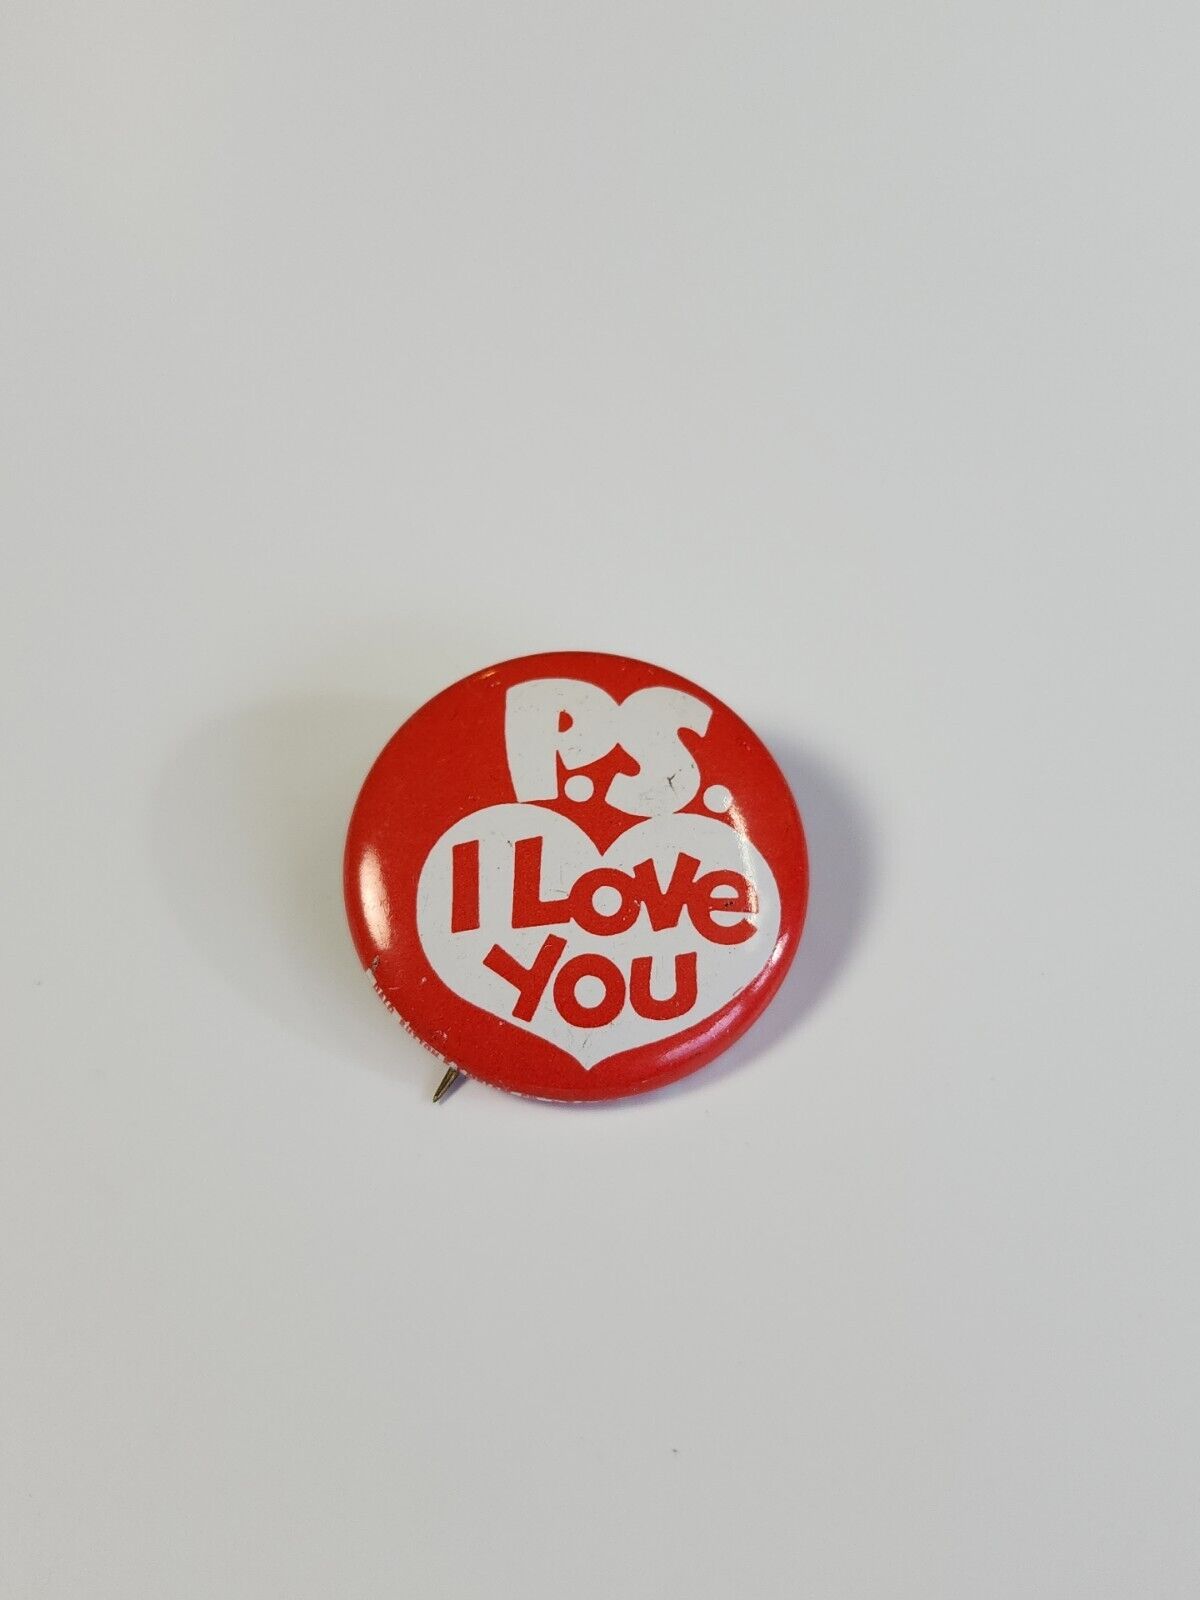 P.S. I Love You Button Pin Red & White Colors Rexall Drug Company Vintage